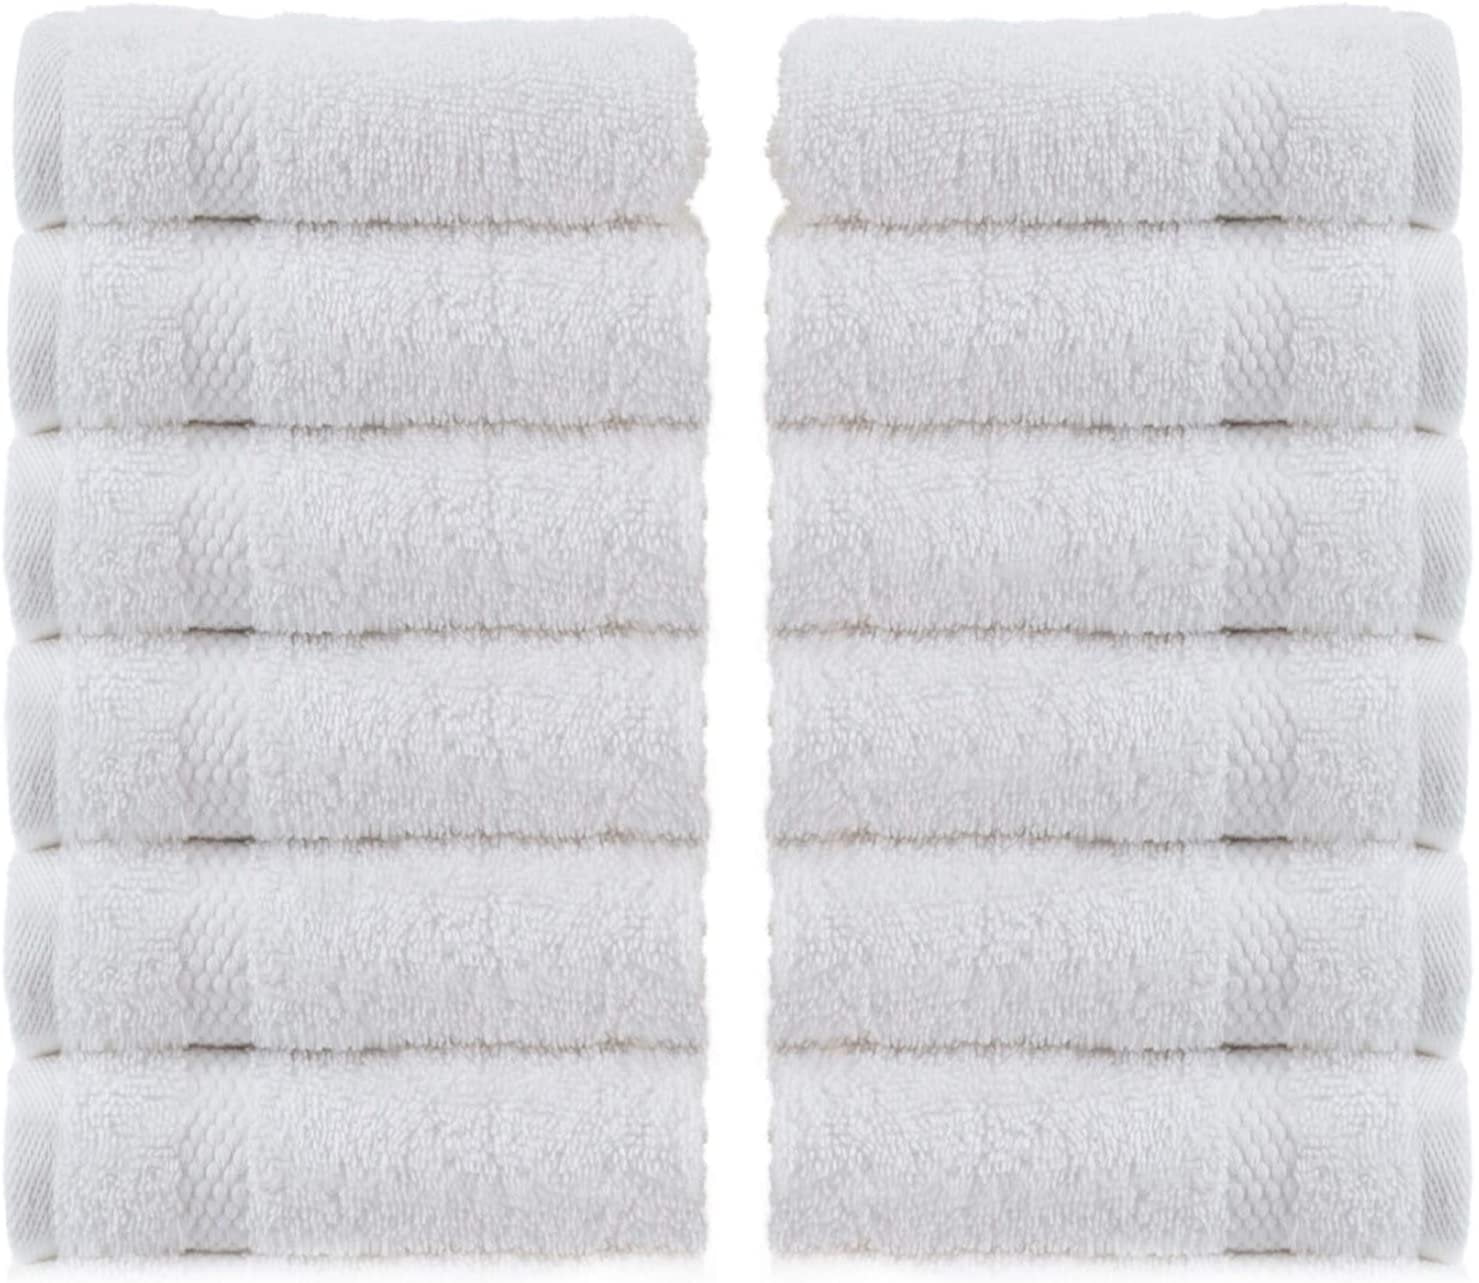 Infinitee Xclusives Premium White Washcloths Set Pack of 12, 13x13 Inches  100% Cotton Wash Cloths for Your Body and Face Towels, Kitchen Dish Towels  and Rags, Baby Washcloth Washcloths Brilliant White